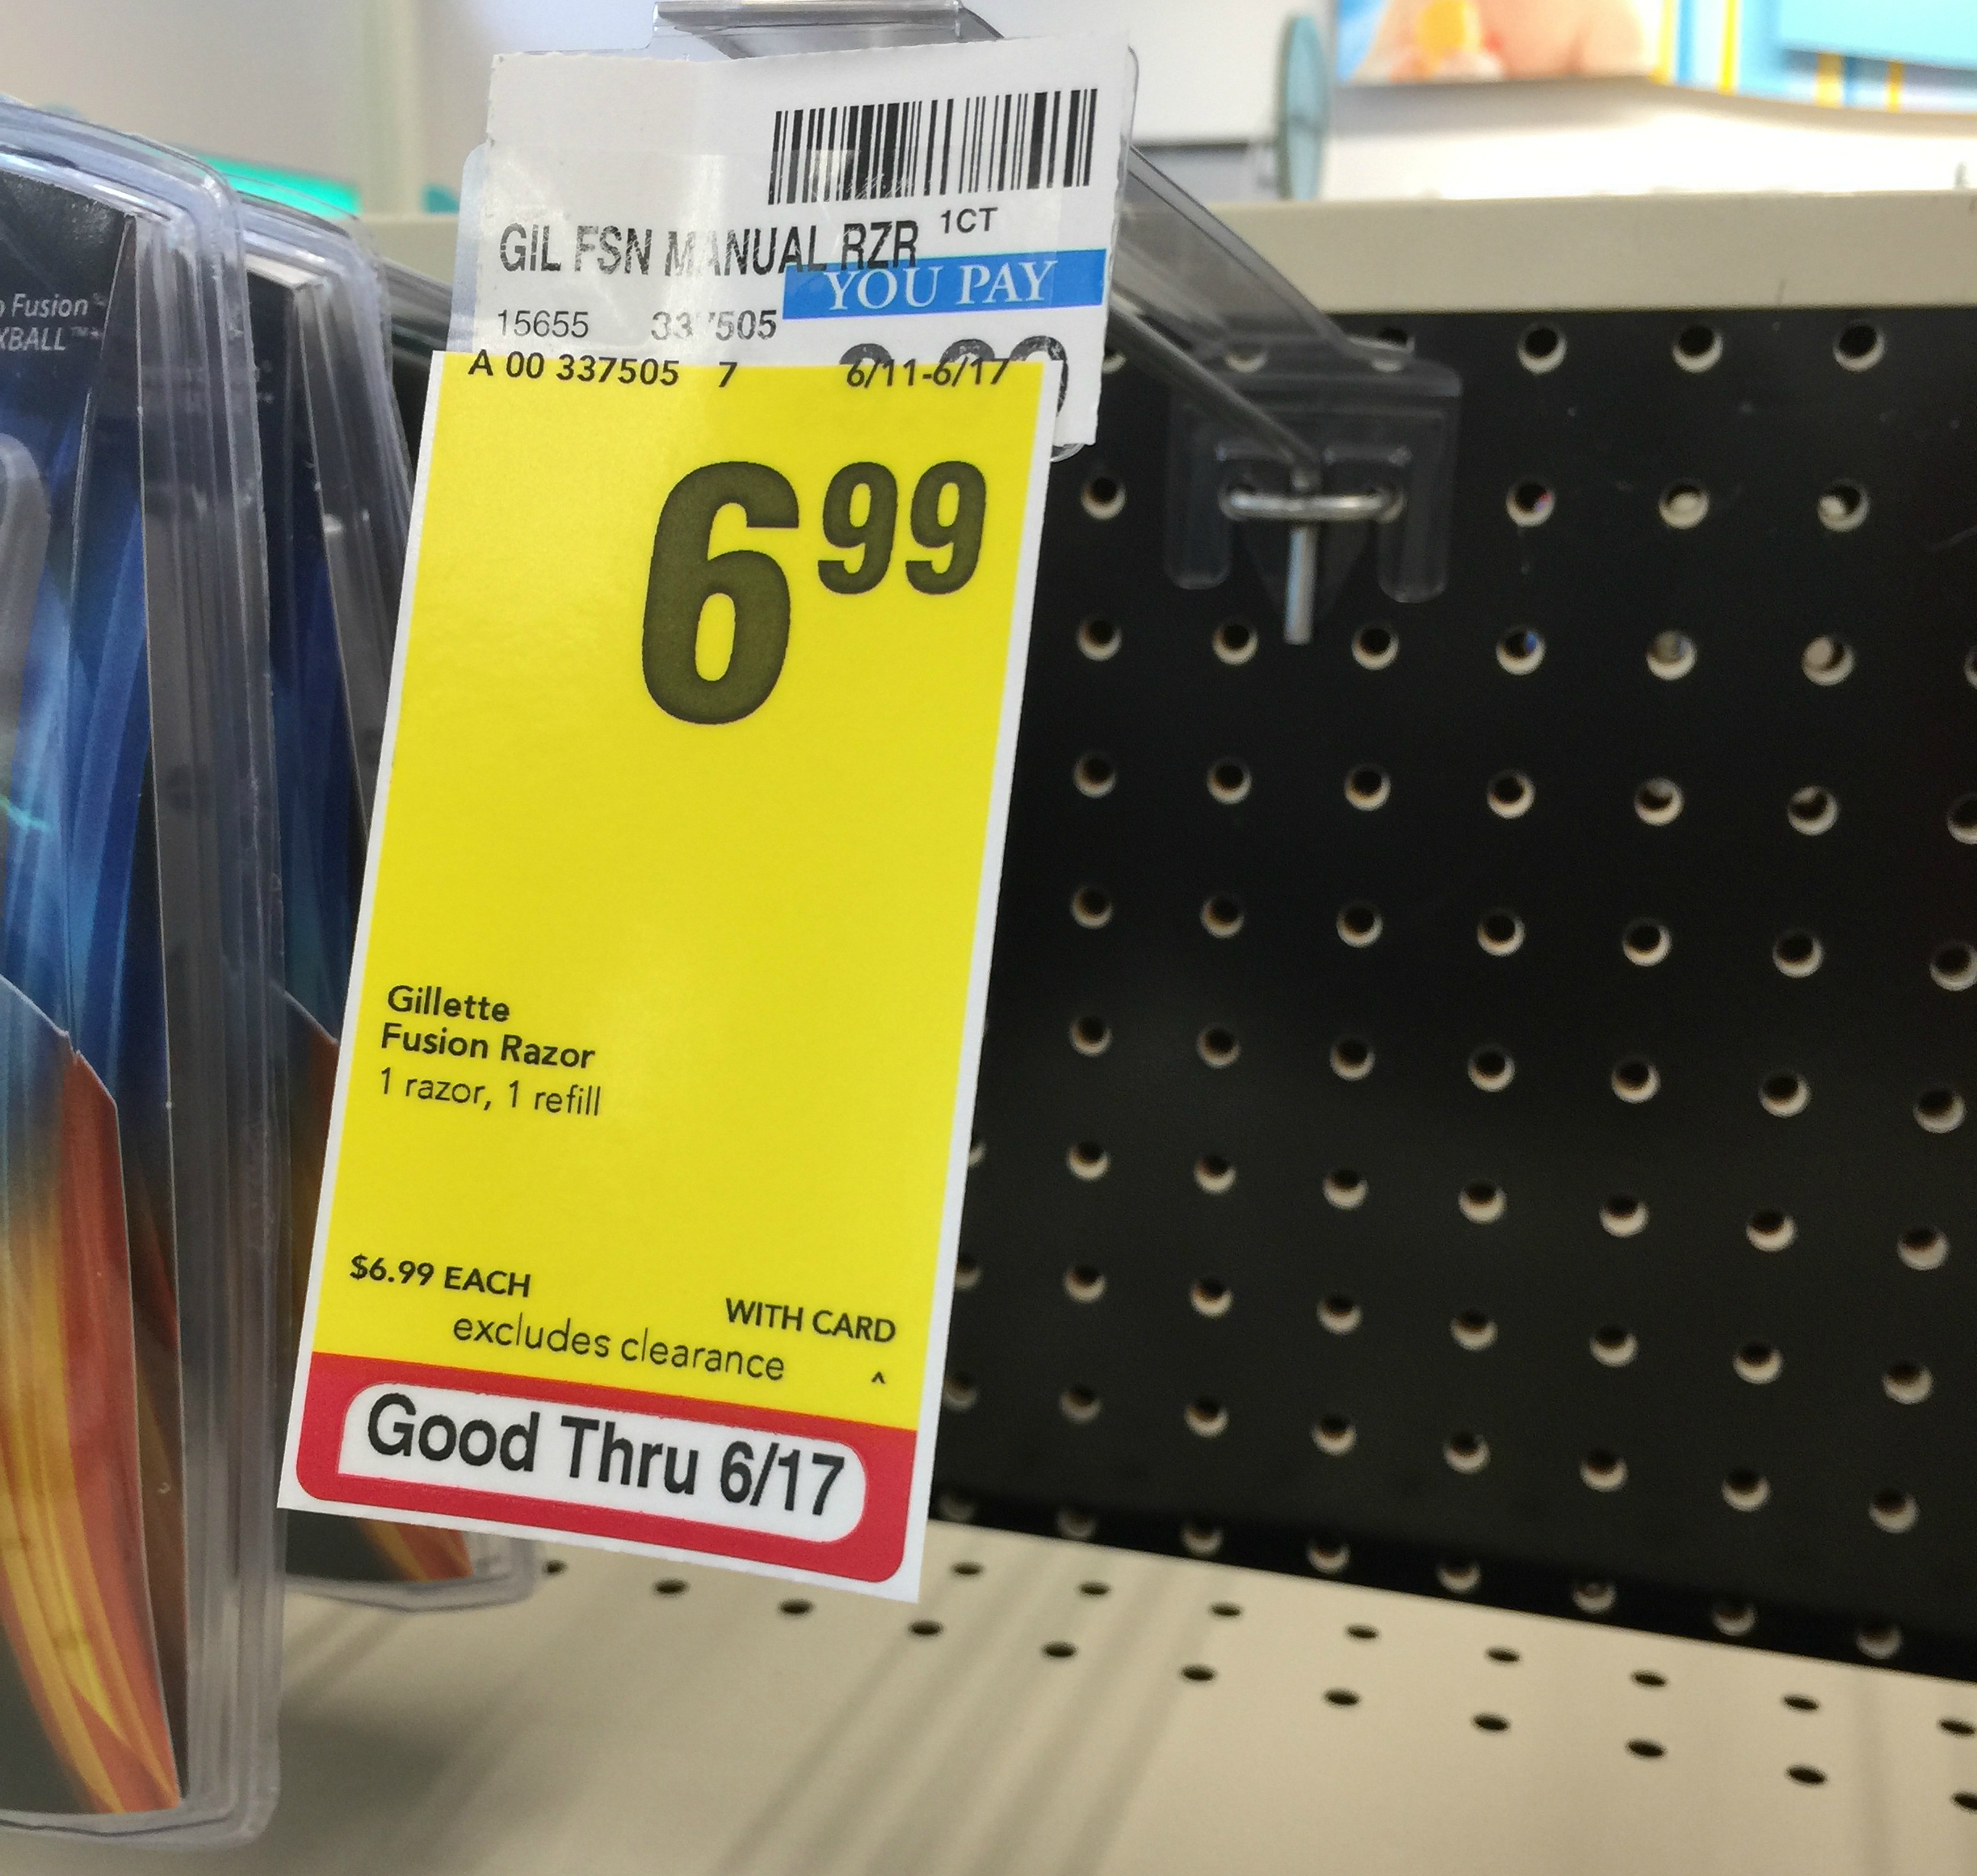 23 money saving tips you may not know about shopping at cvspharmacy – get a raincheck on out of stock items